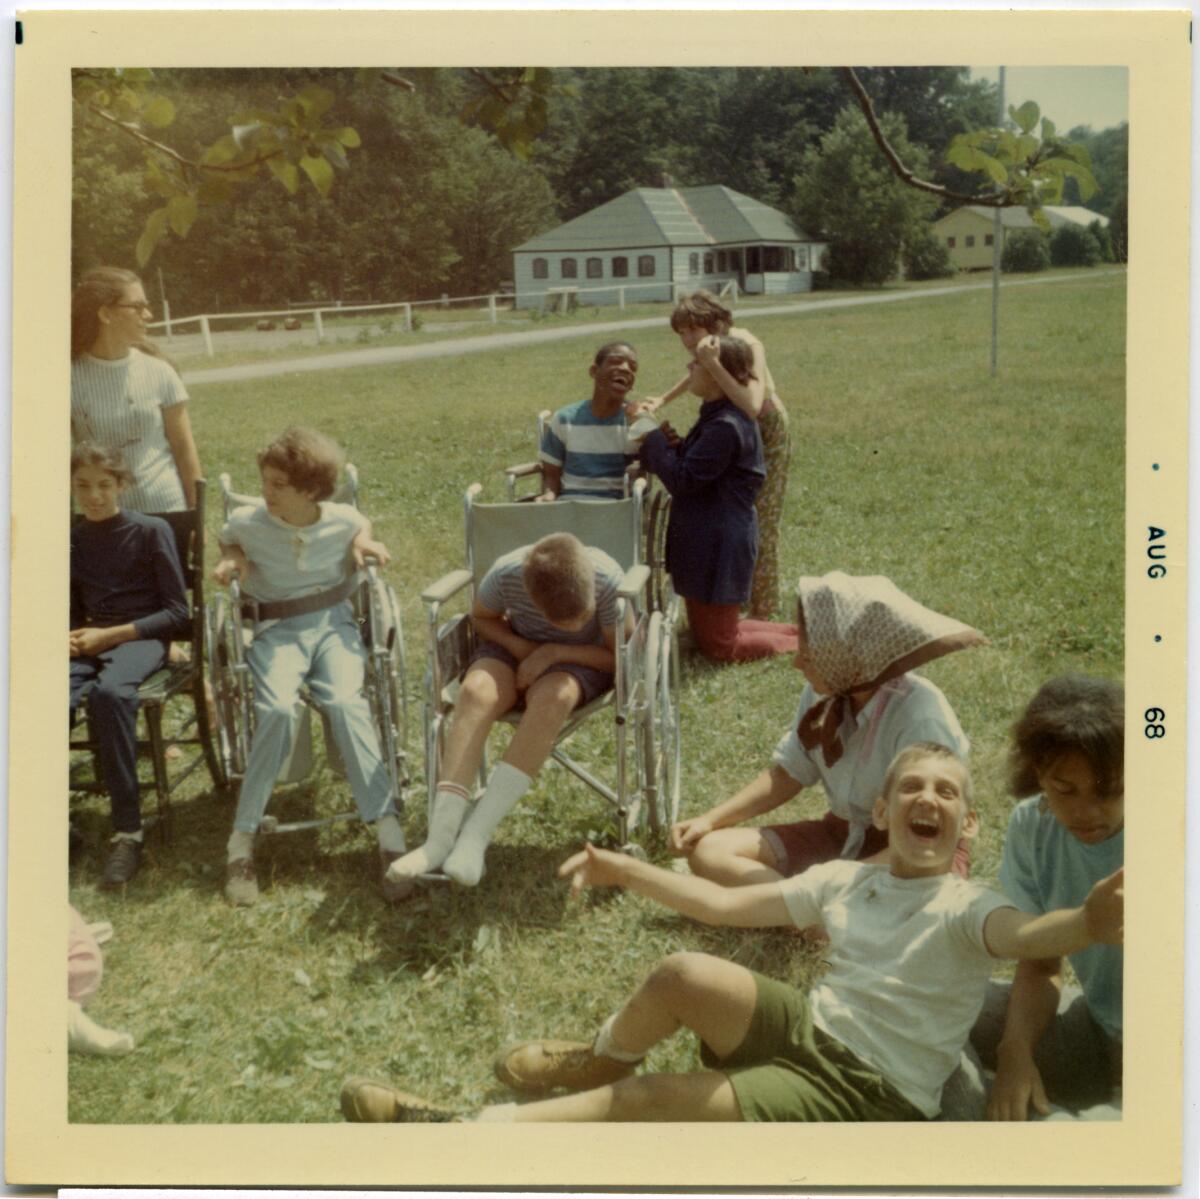 Several children using wheelchairs and others are seen in the sunshine on a grassy field in a 1968 photo.